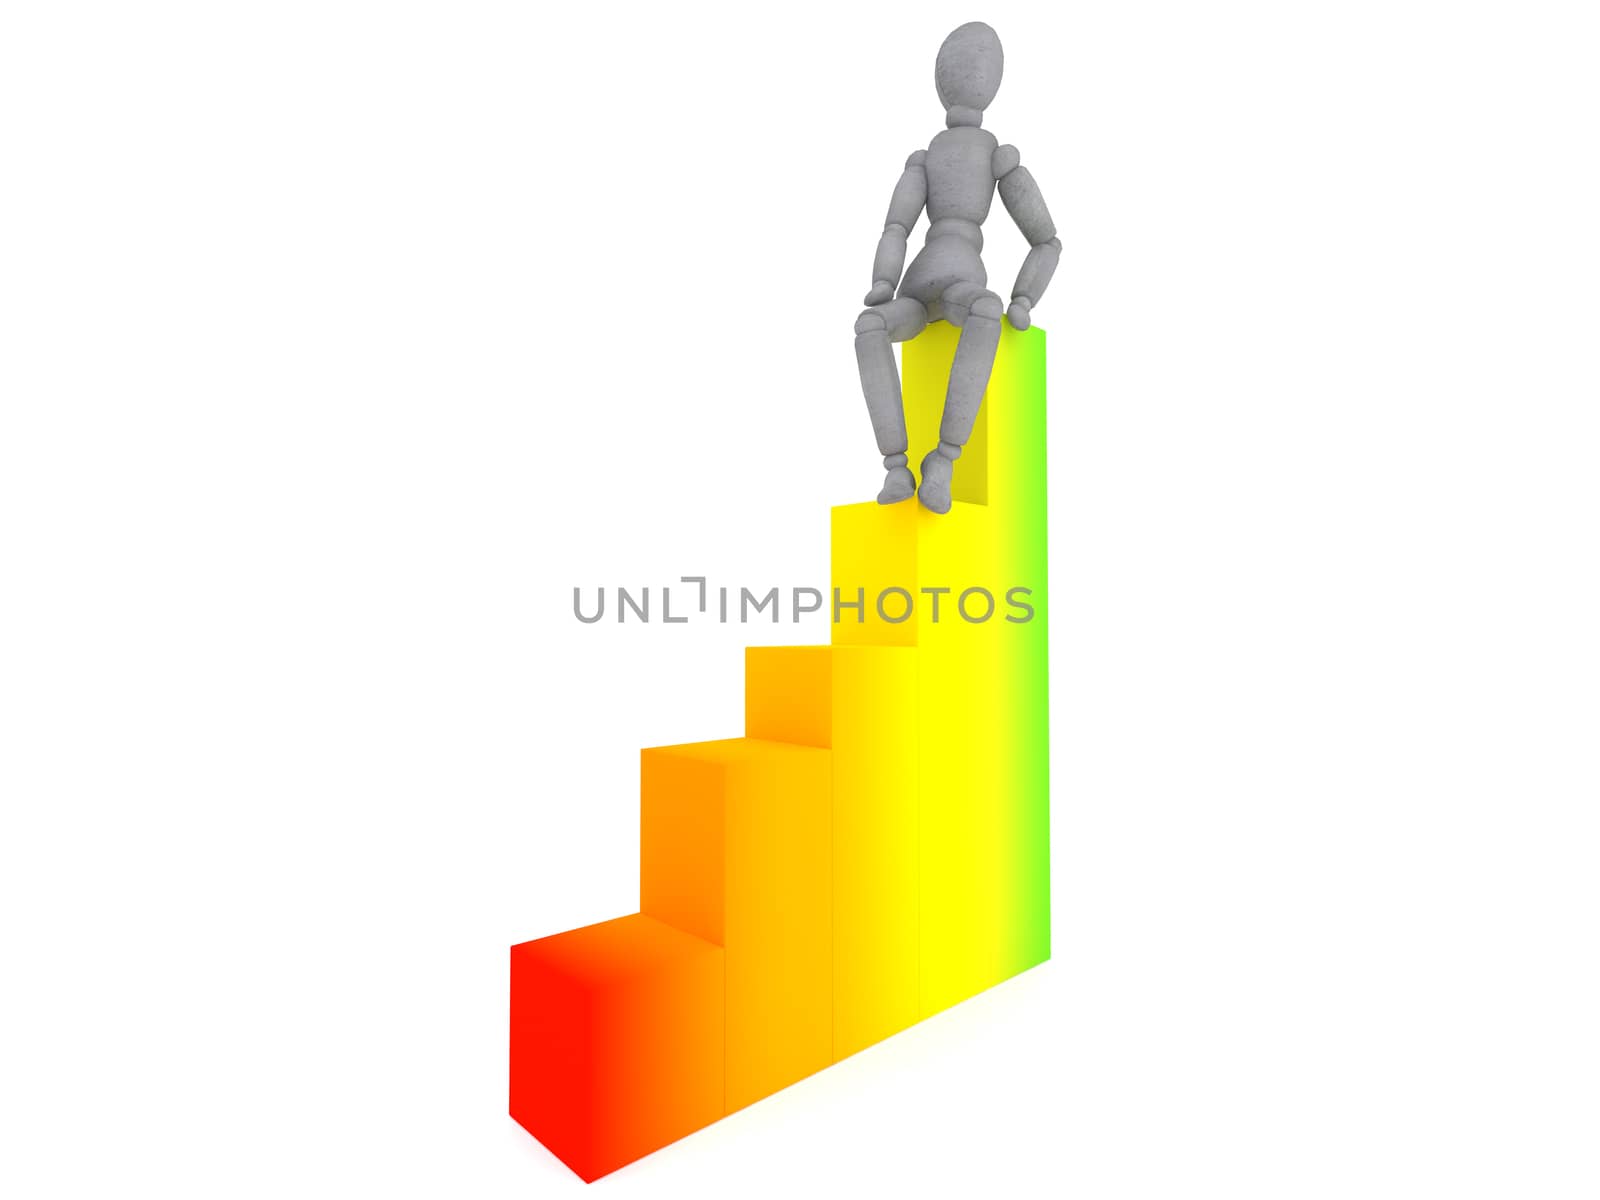 doll model sits on the highest point of the graph in a relaxed position